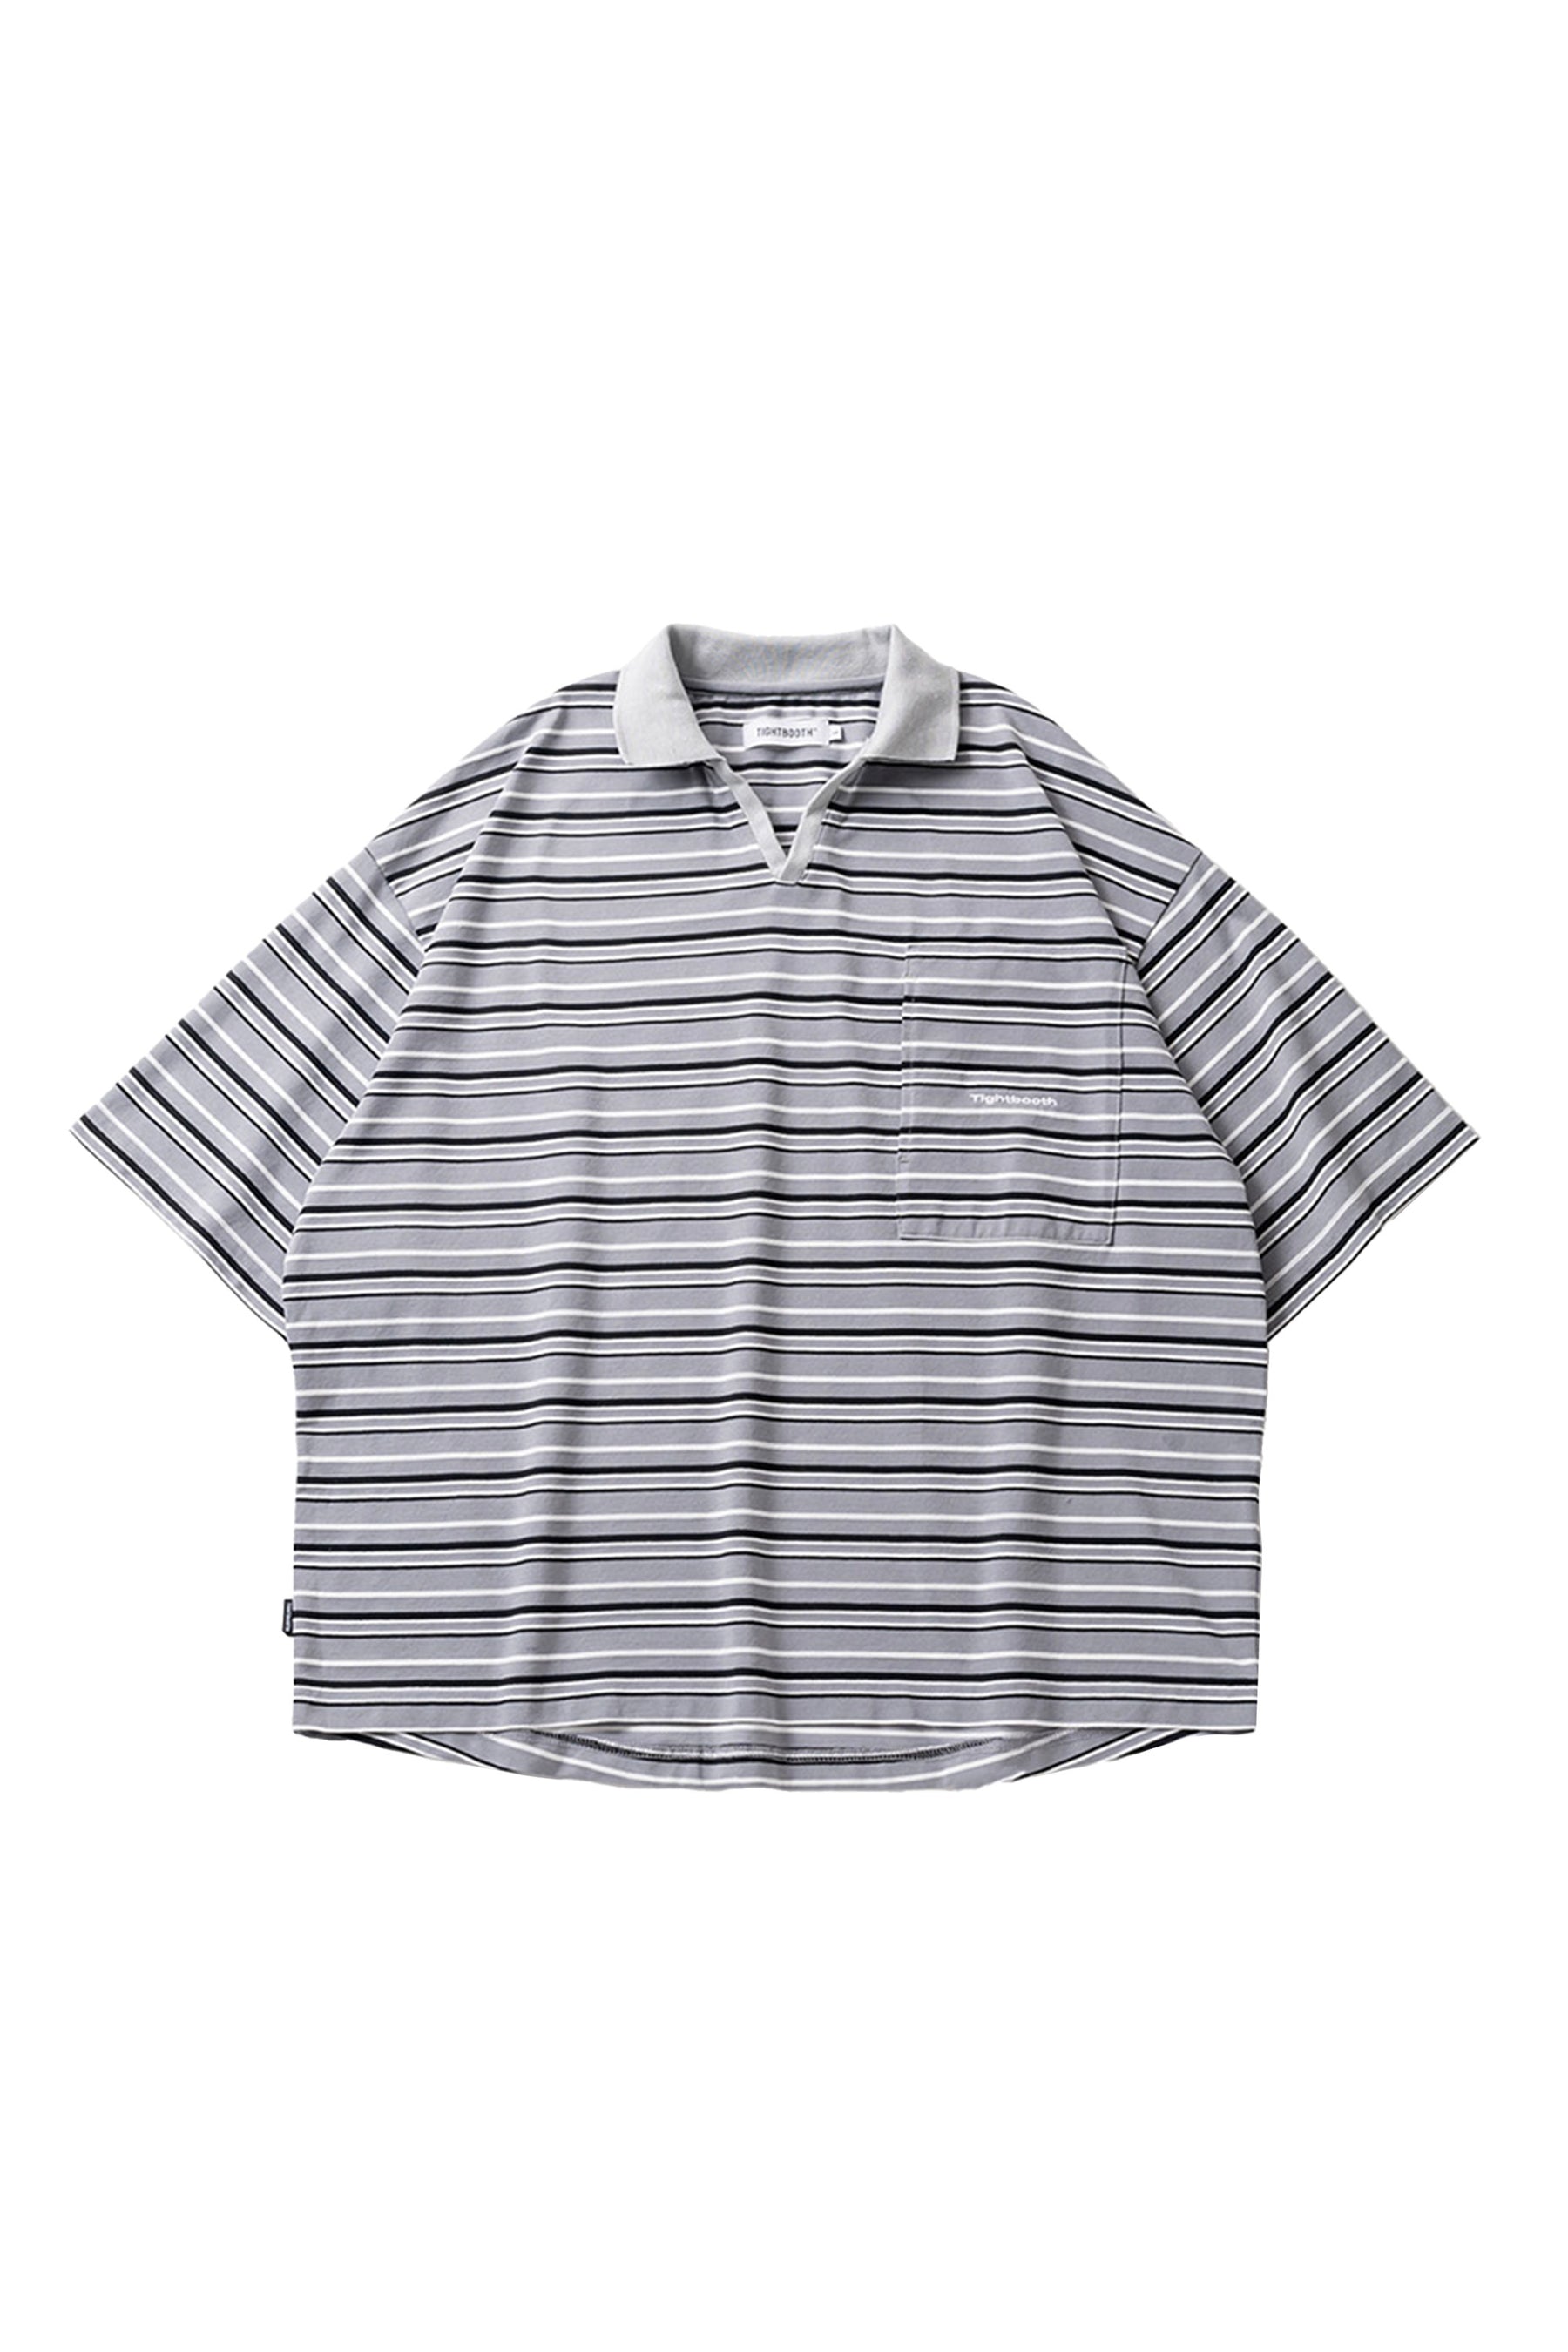 TIGHTBOOTH SS23 BORDER OPEN POLO / GRY -NUBIAN